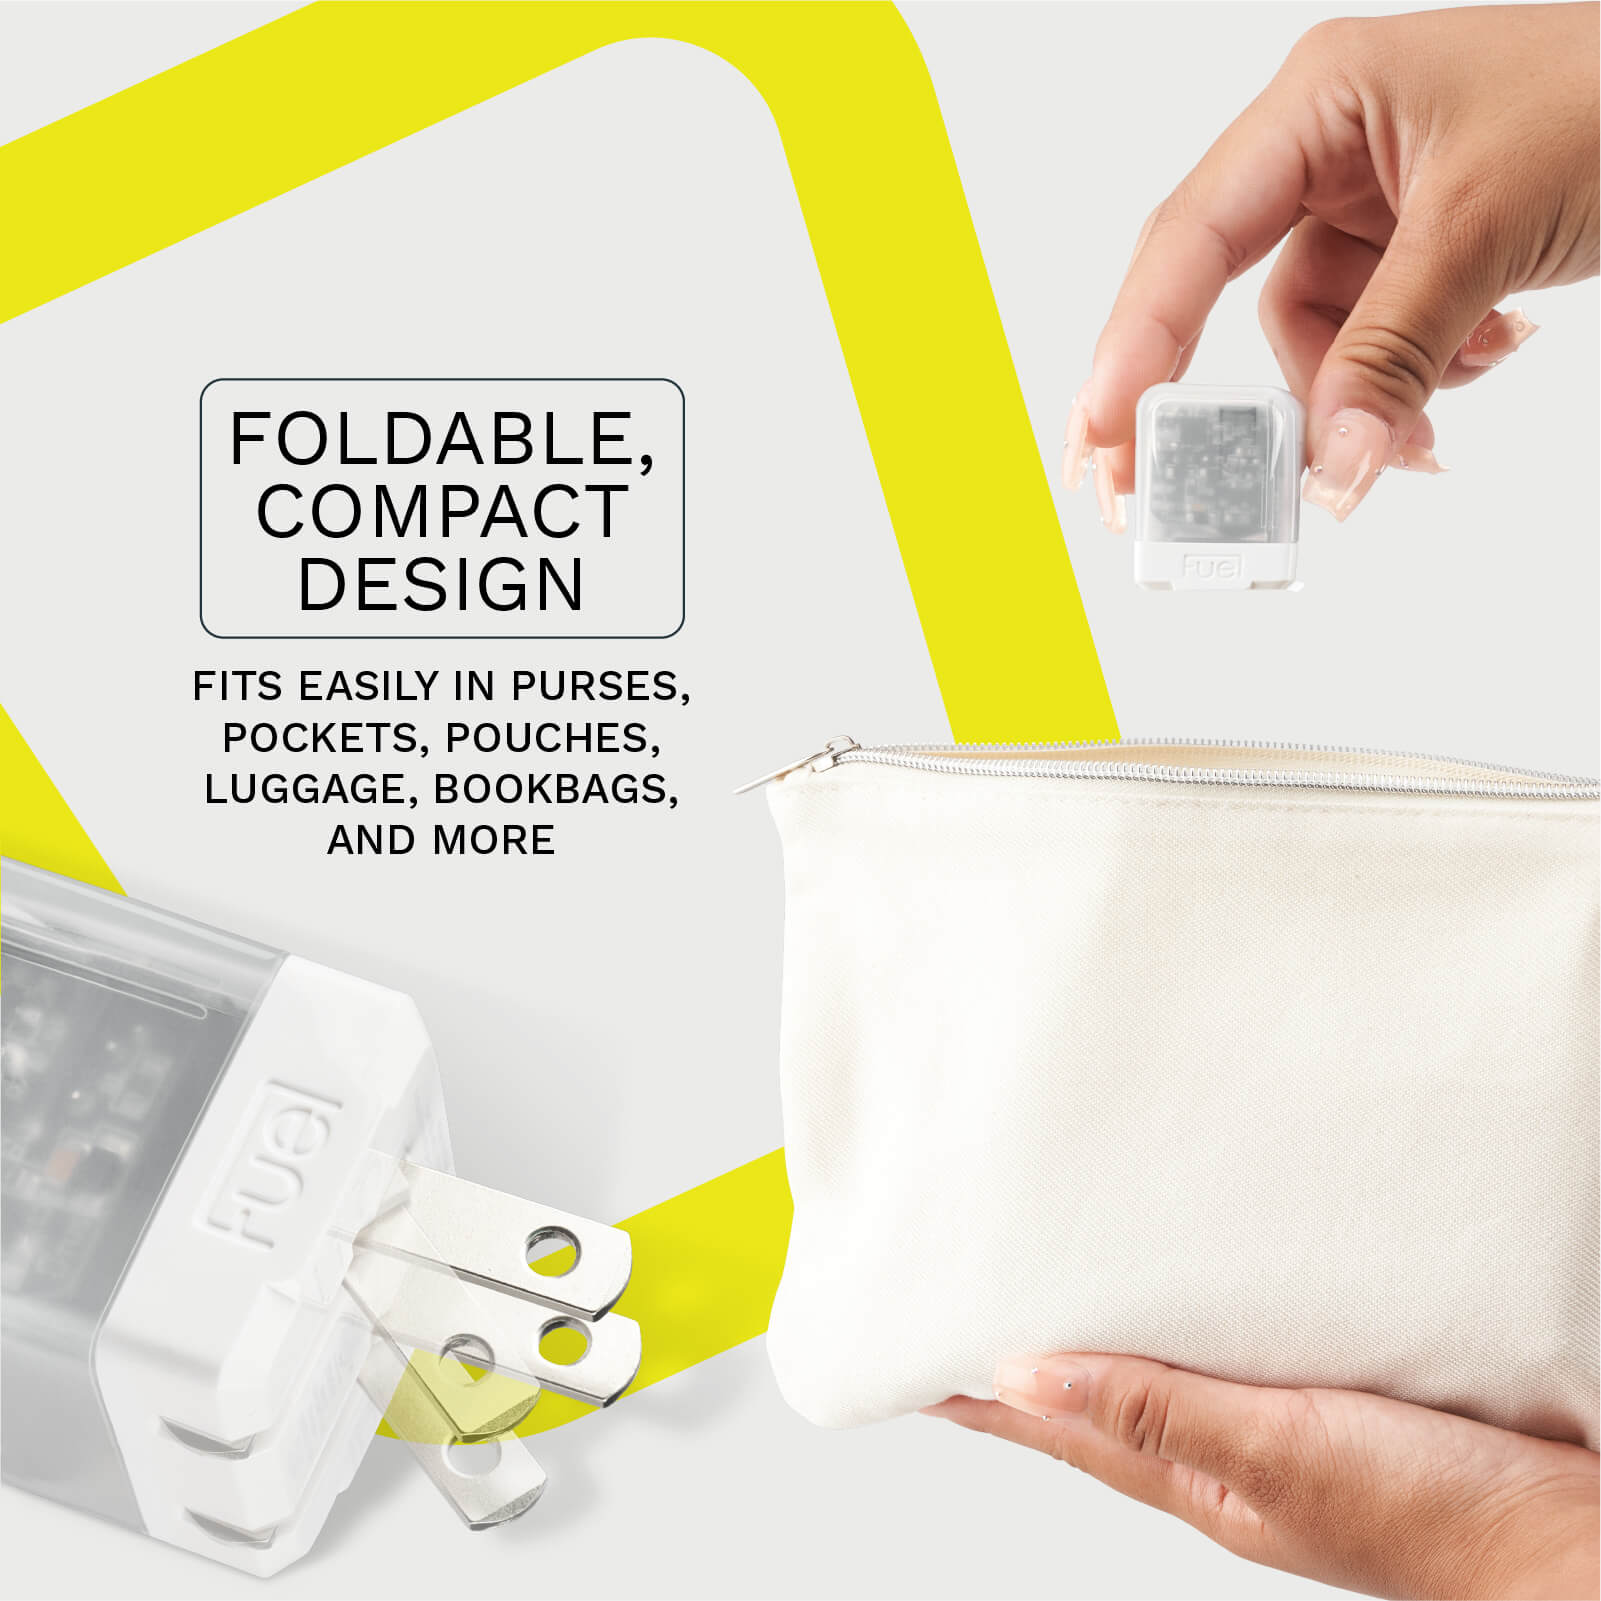 FOLDABLE, COMPACT DESIGN. FITS EASILY IN PURSES, POCKETS, POUCHES, LUGGAGE, BOOKBAGS, AND MORE color::Frosted White